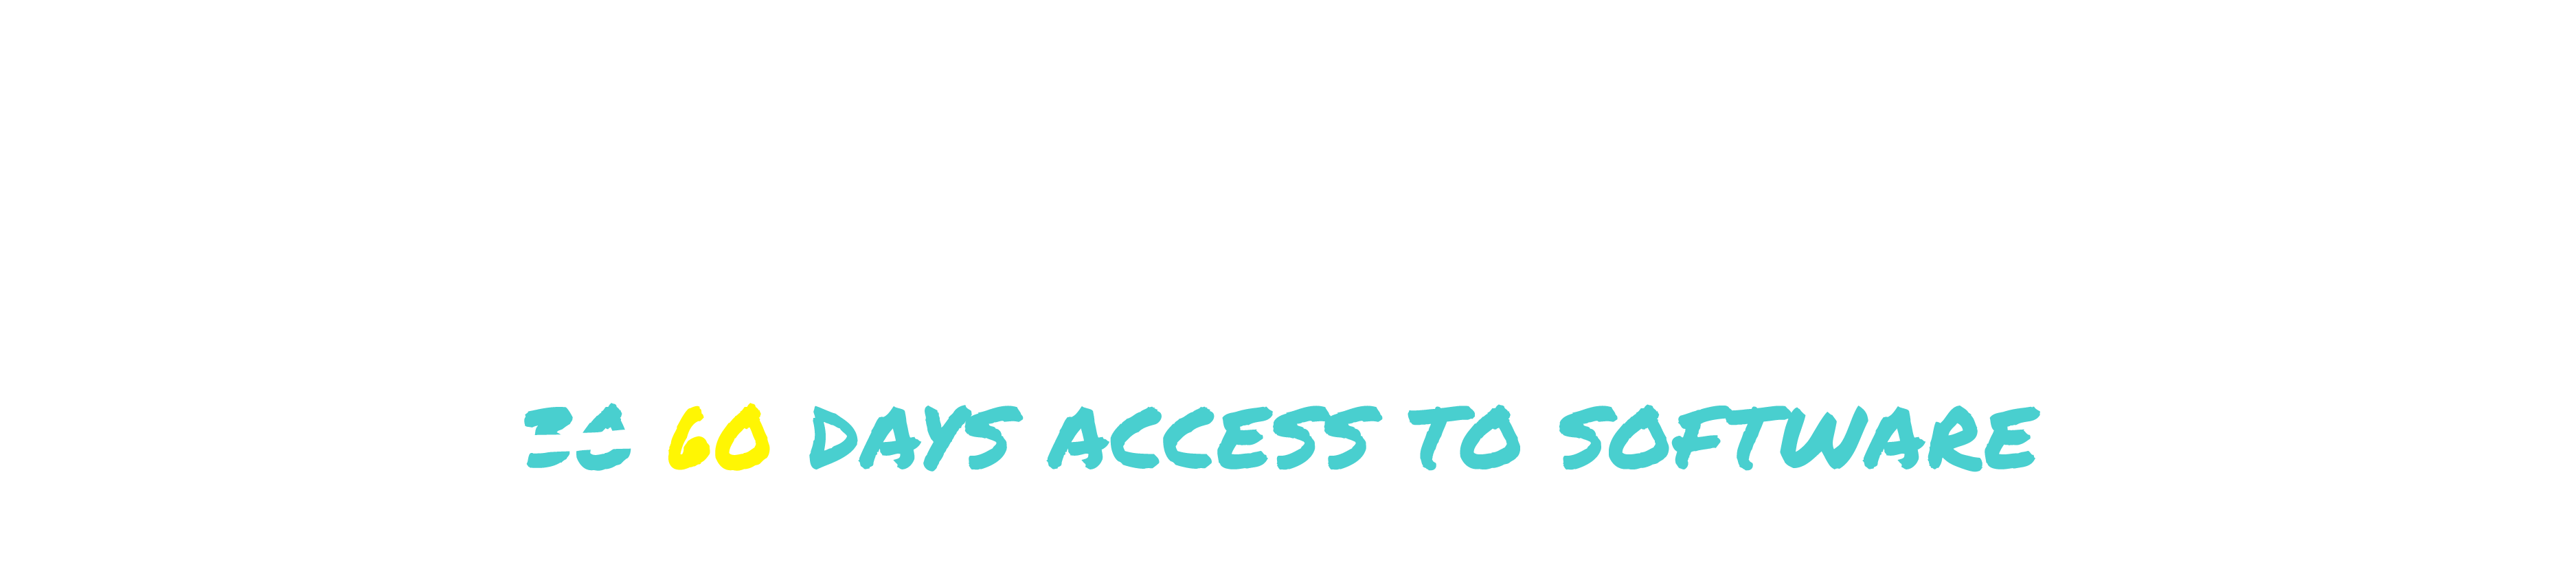 60 Days Access to Software: Value $69